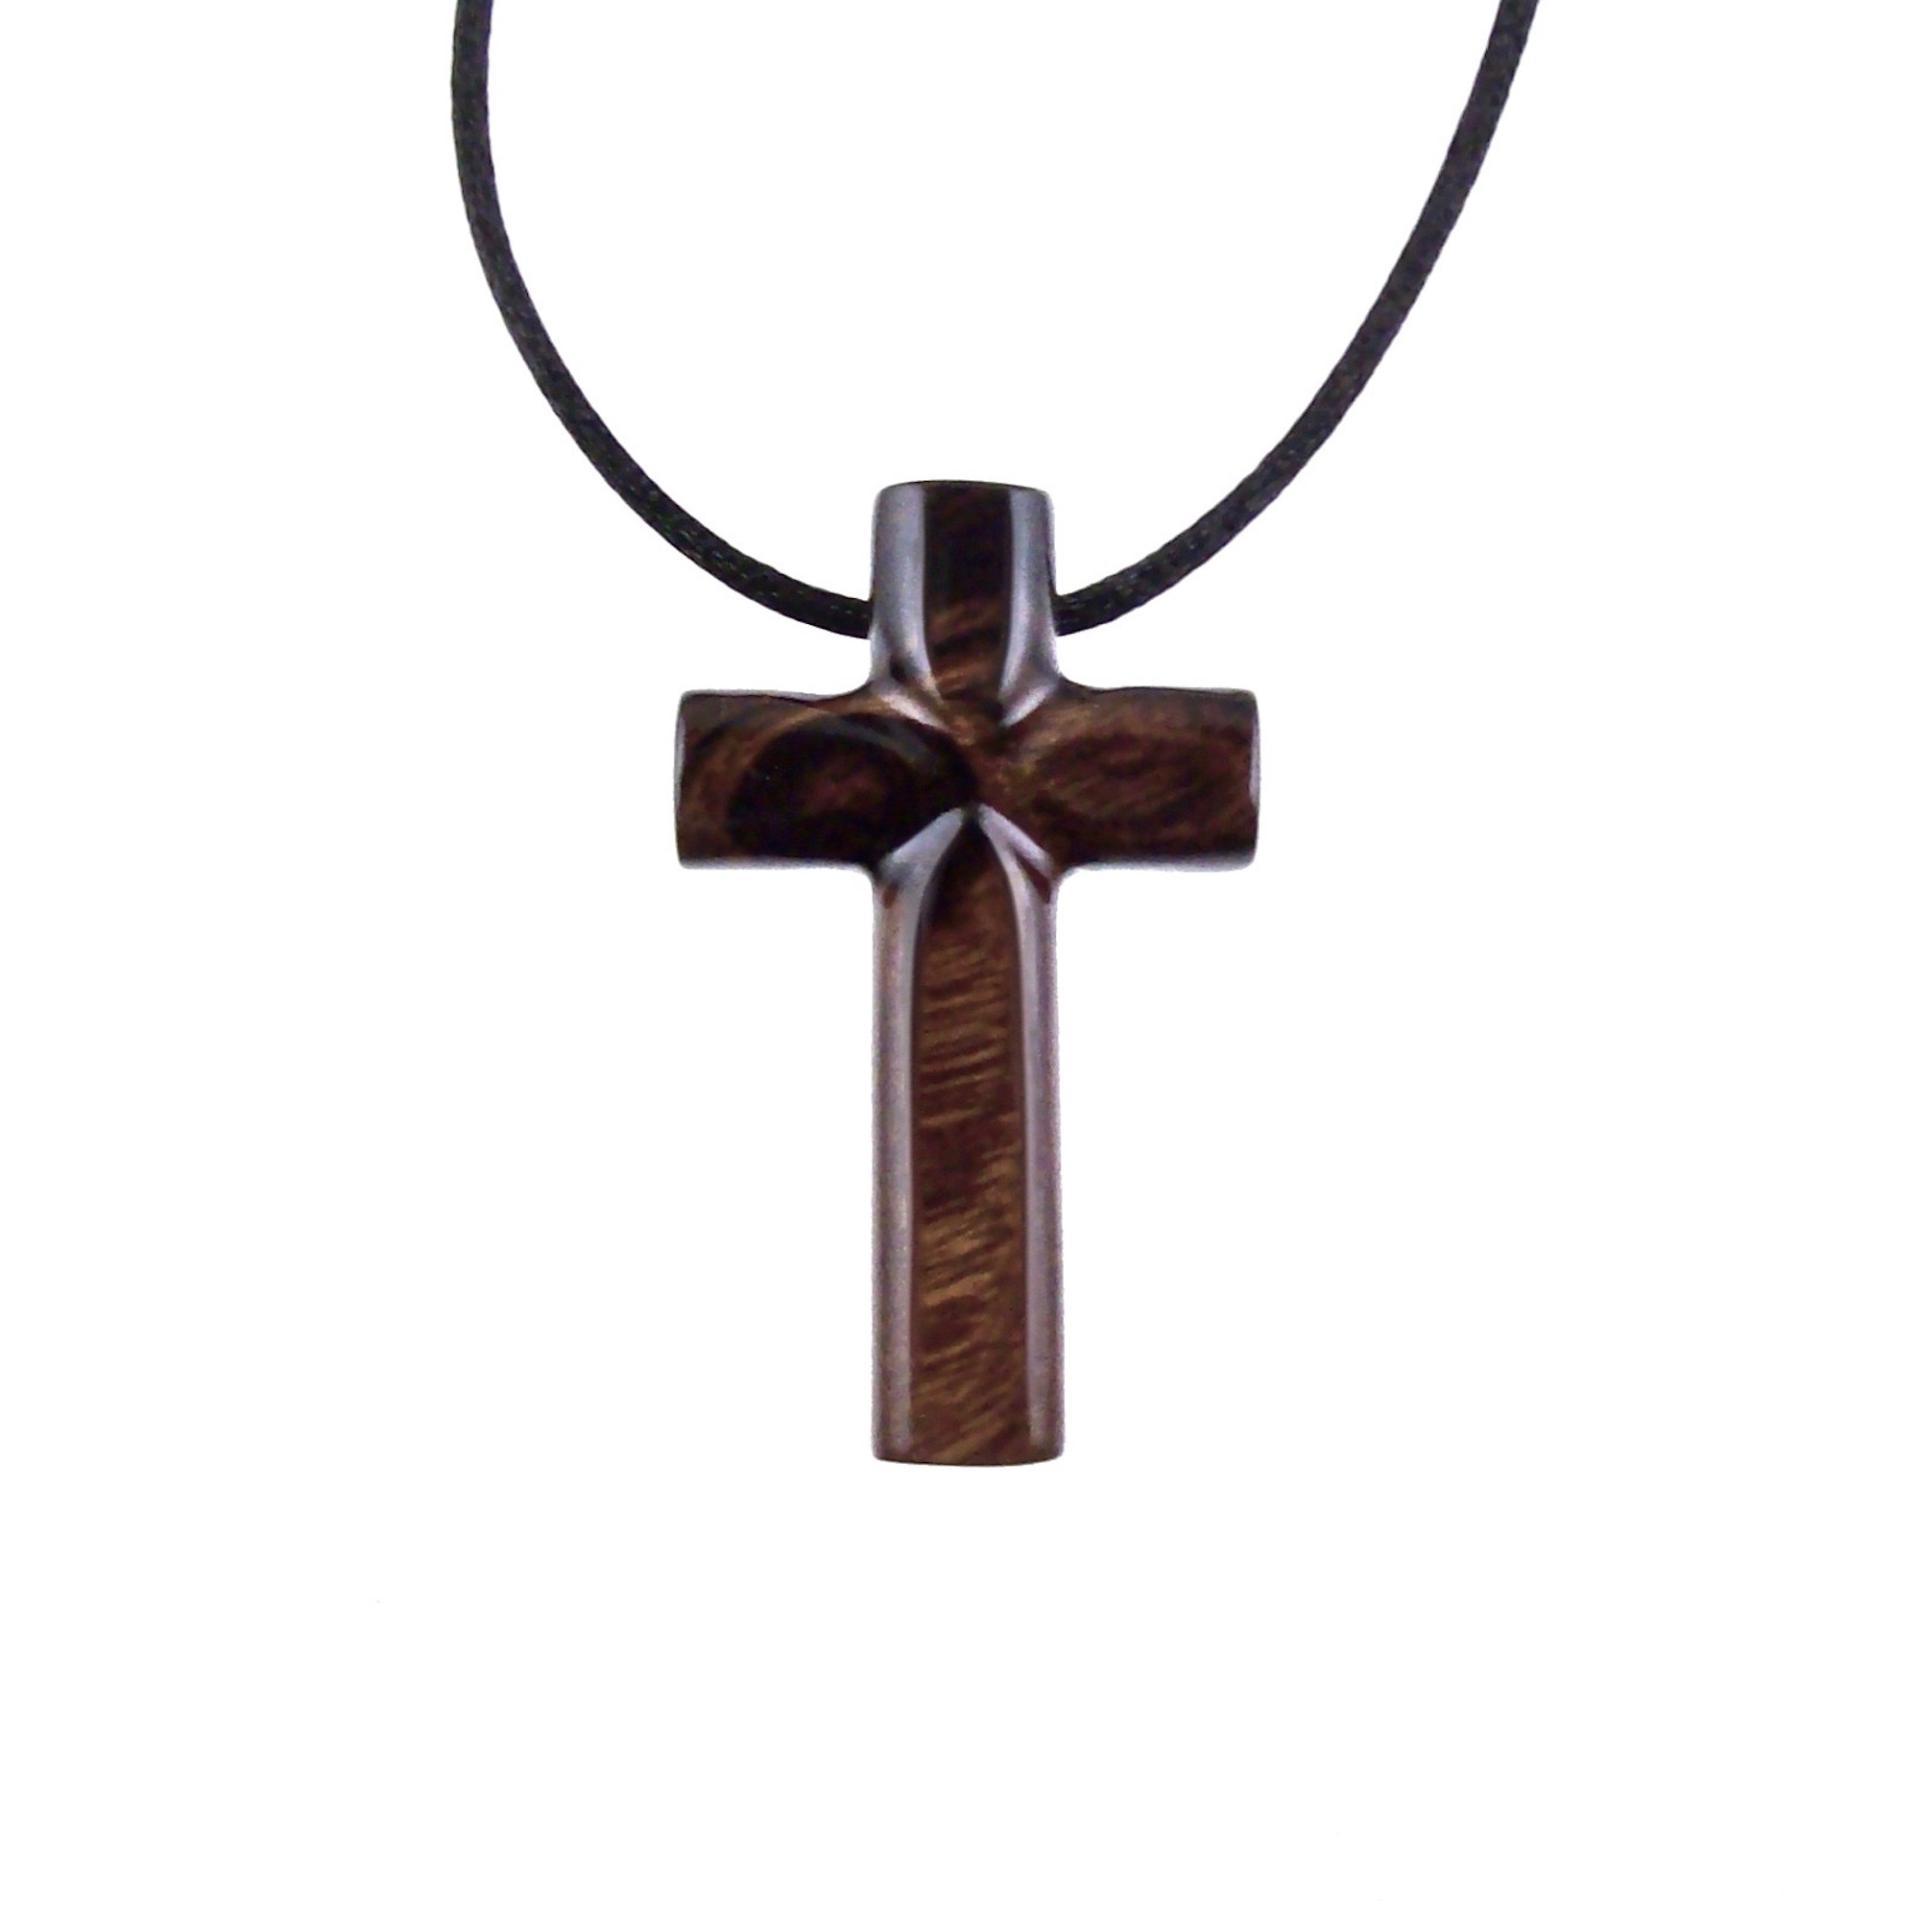 Wood Cross Necklace, Hand Carved Wooden Cross Pendant, Christian Jewelry for Men, One of a Kind Gift for Him